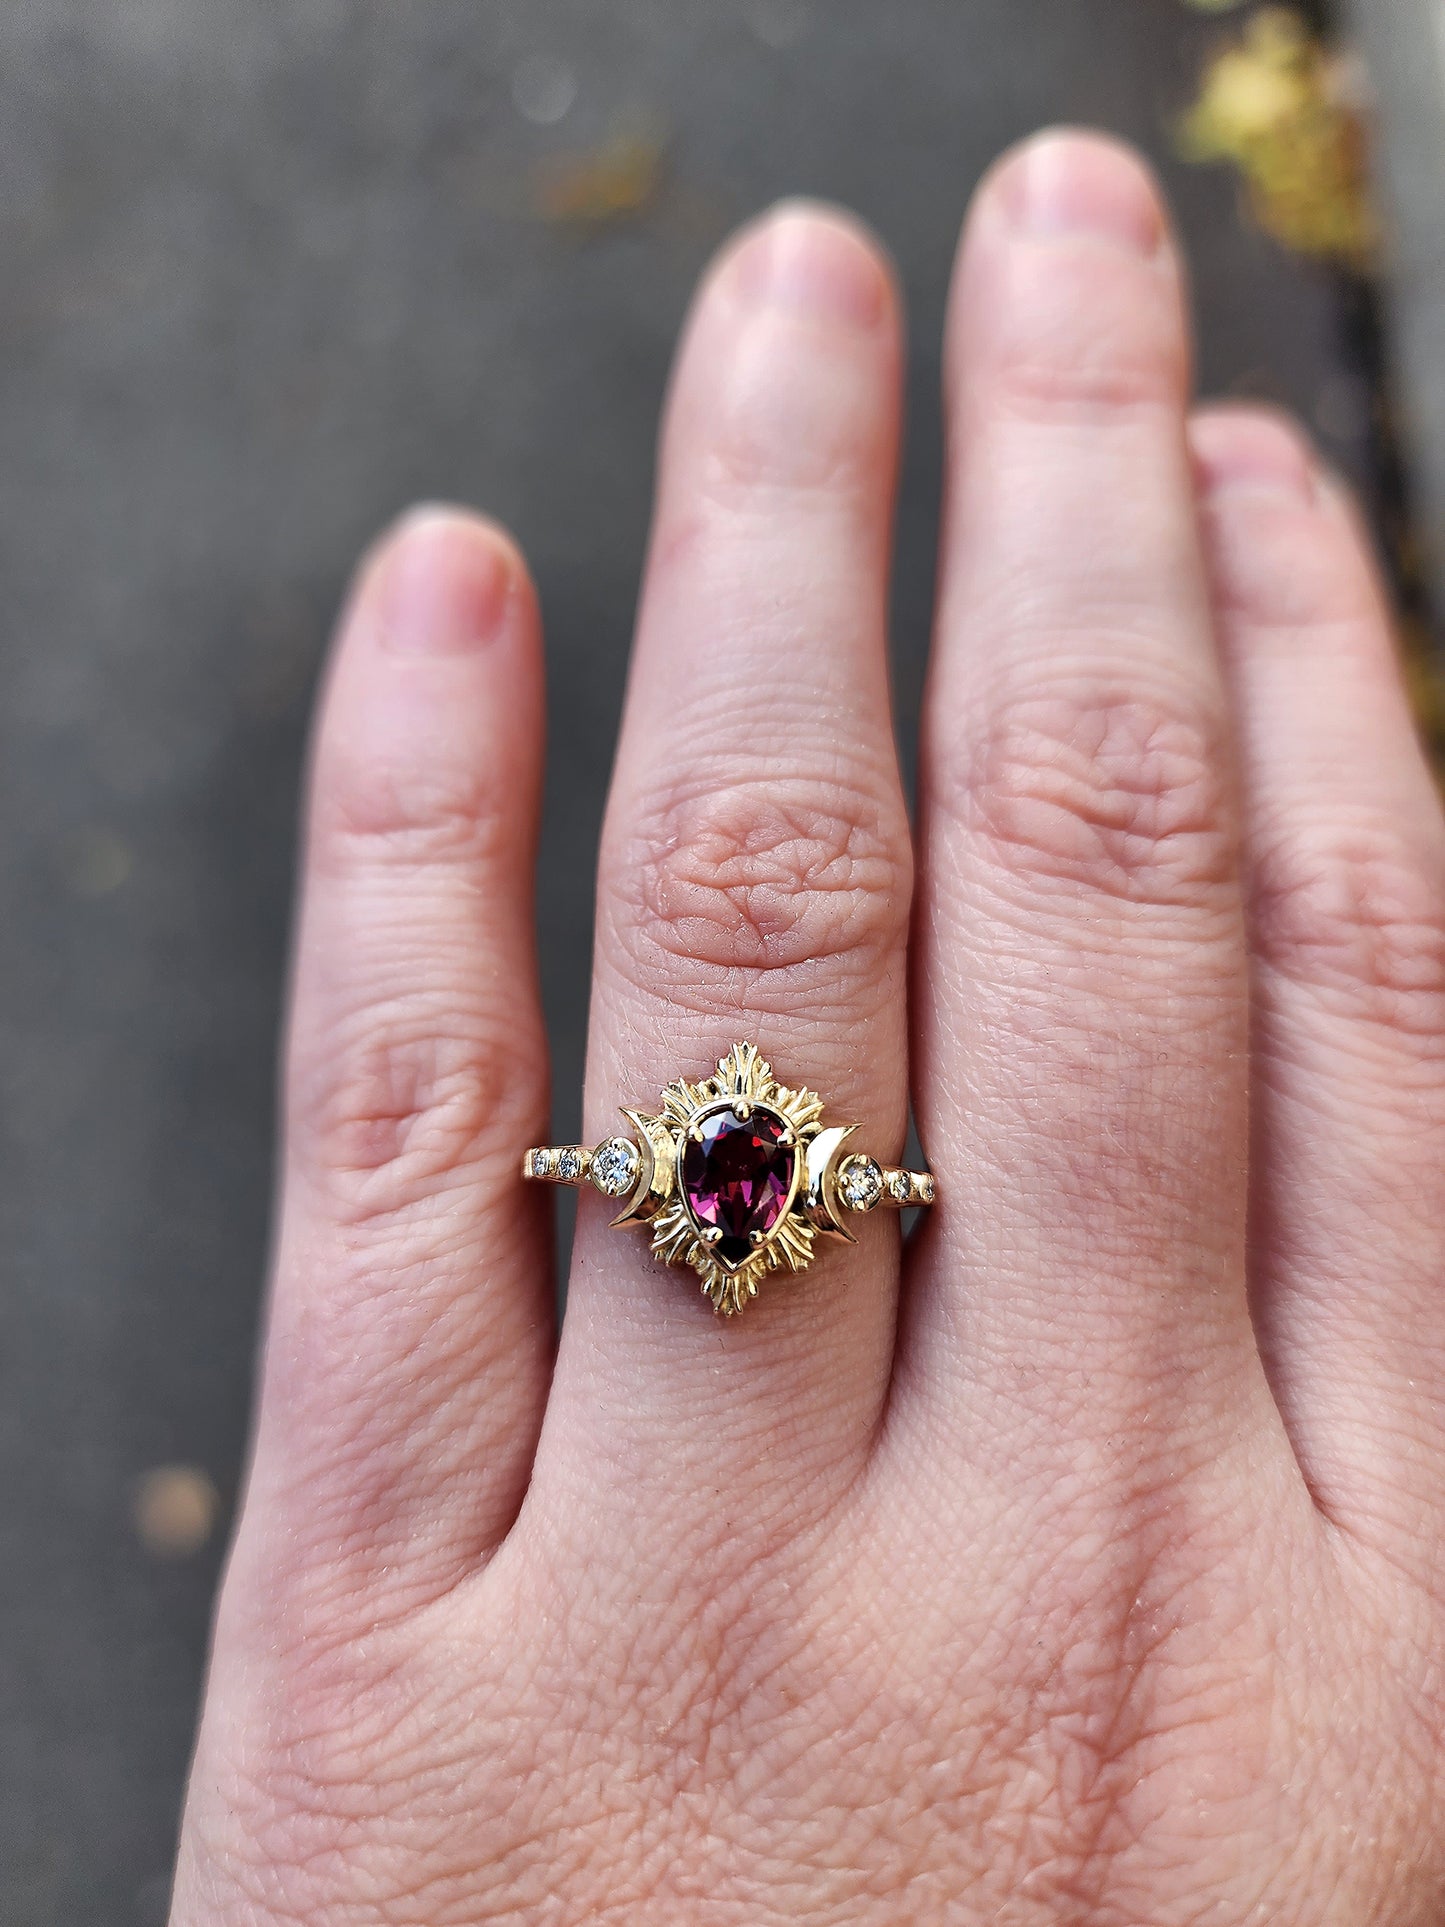 Load image into Gallery viewer, Pear Rhodolite Garnet Engagement Ring with Crescent Moons and Diamonds - Moon Fire Celestial 14k Yellow Gold Wedding Ring
